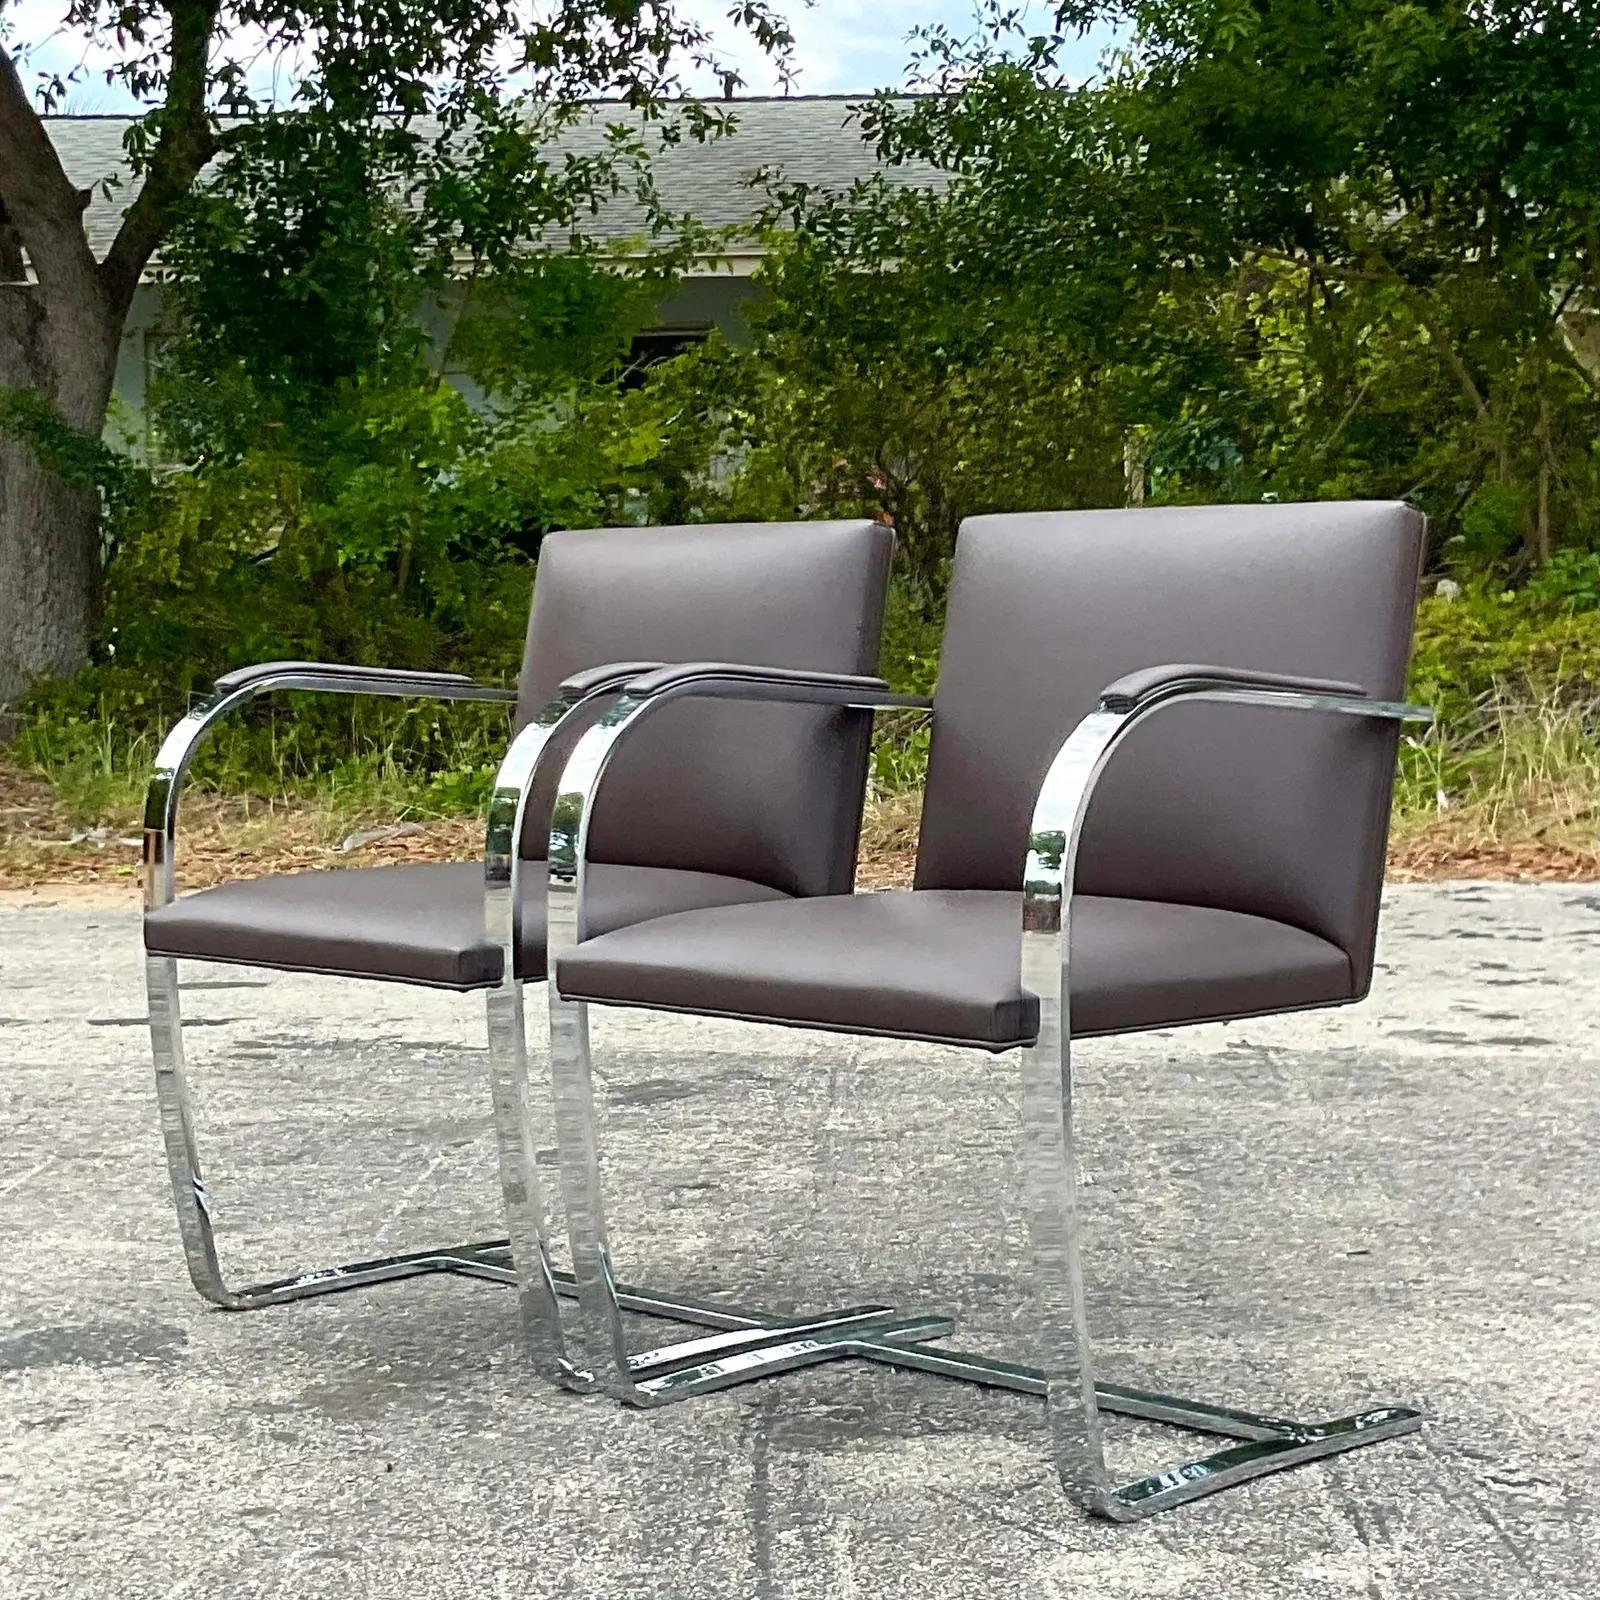 A pristine pair of vintage Contemporary Flat bar chrome chairs. Designed by the iconic Mies Van Der Rohe and produces by Knoll Studios. Signed on the bottom. Beautiful dark brown leather upholstery. Acquired from a Palm Beach estate.